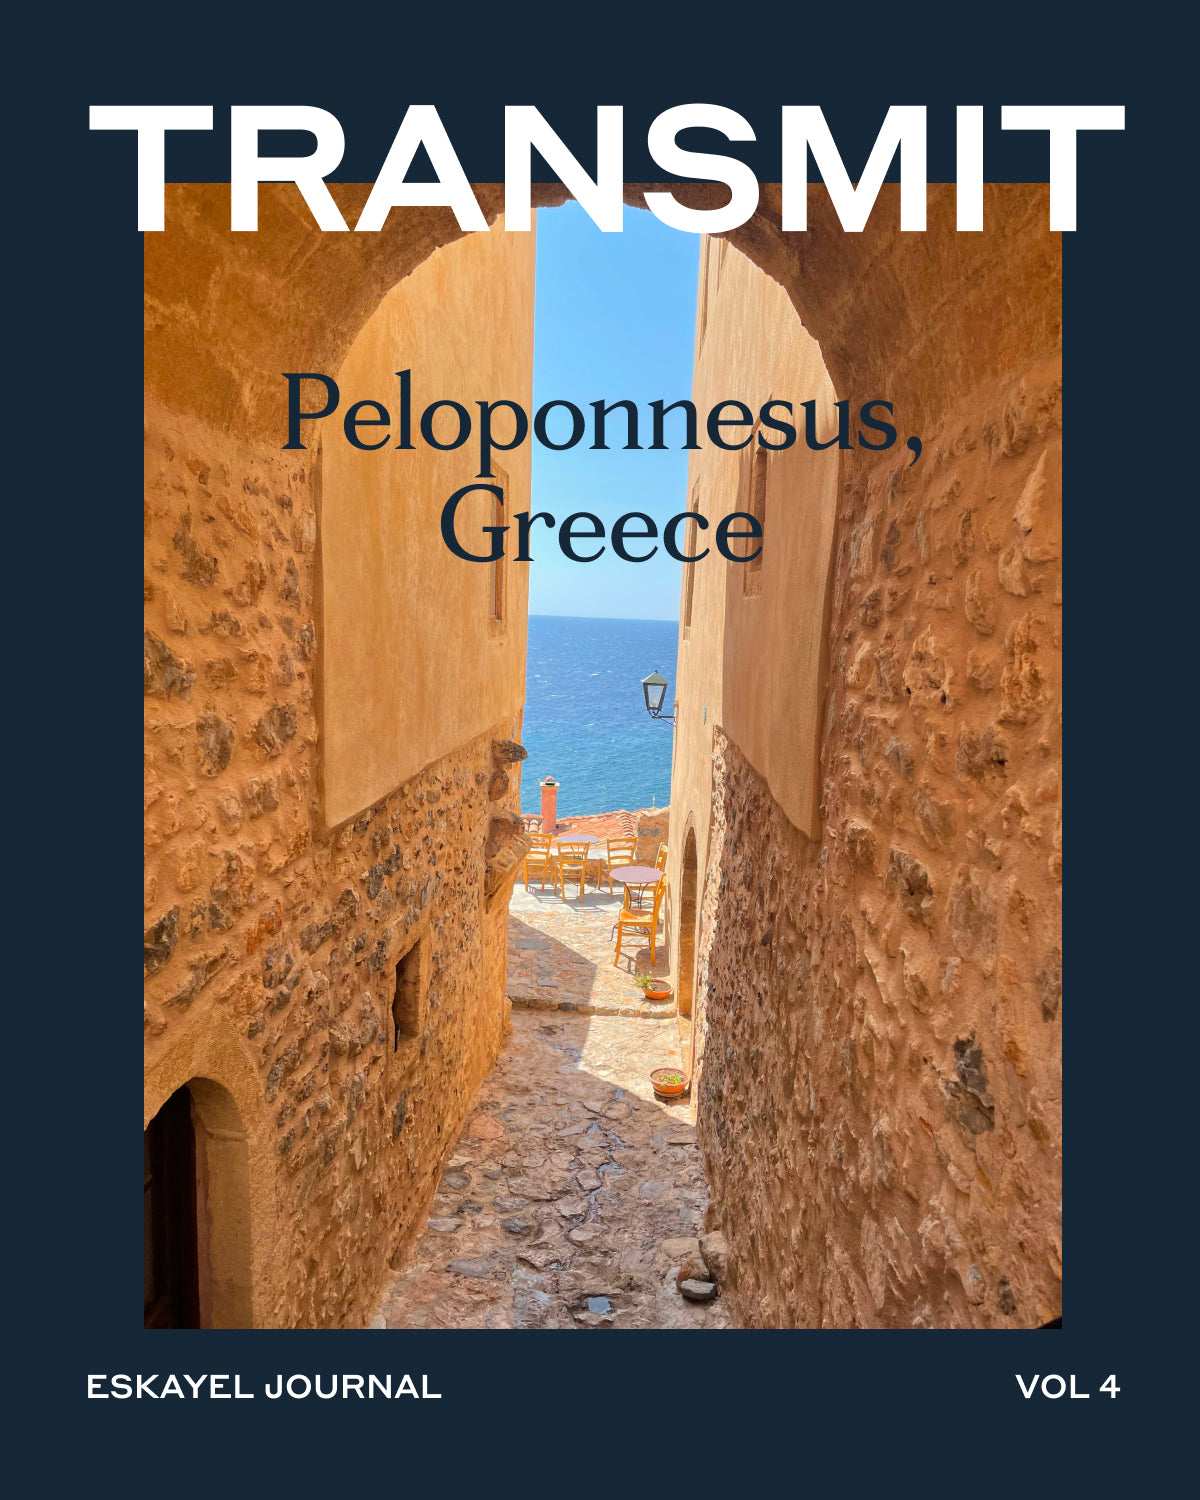 The cover of transmit peloponnesus, greece